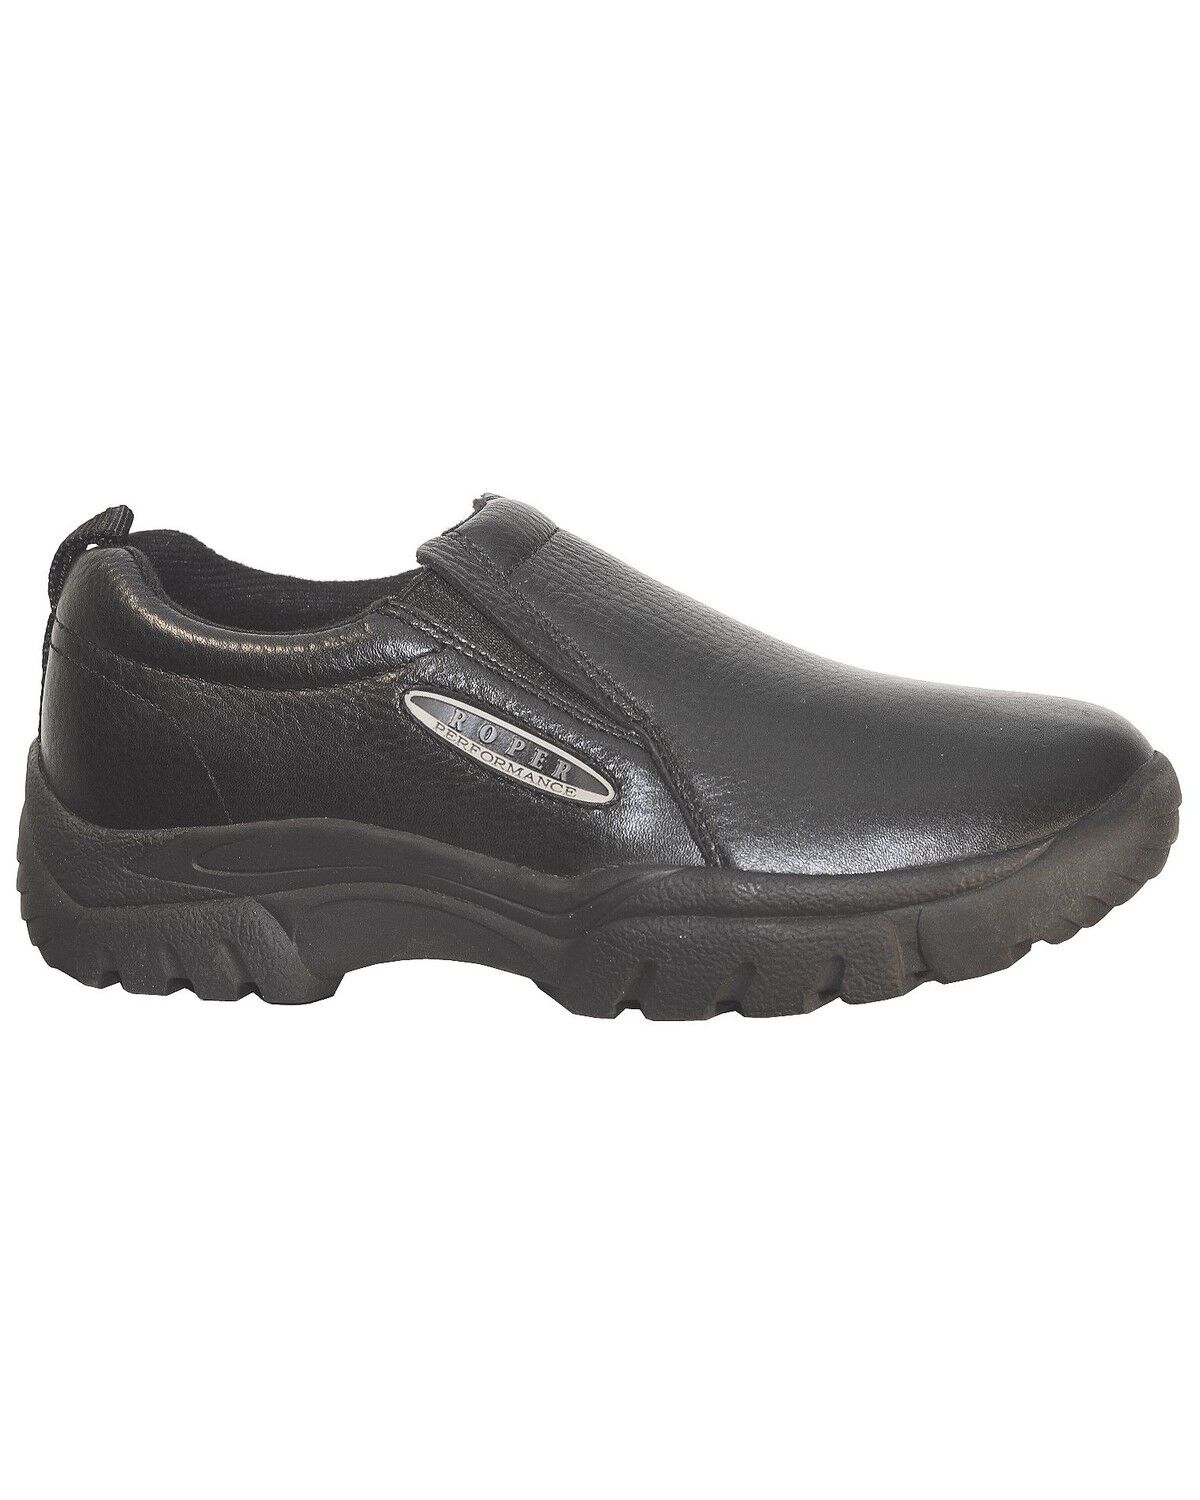 Roper Performance Slip-On Casual Shoes 